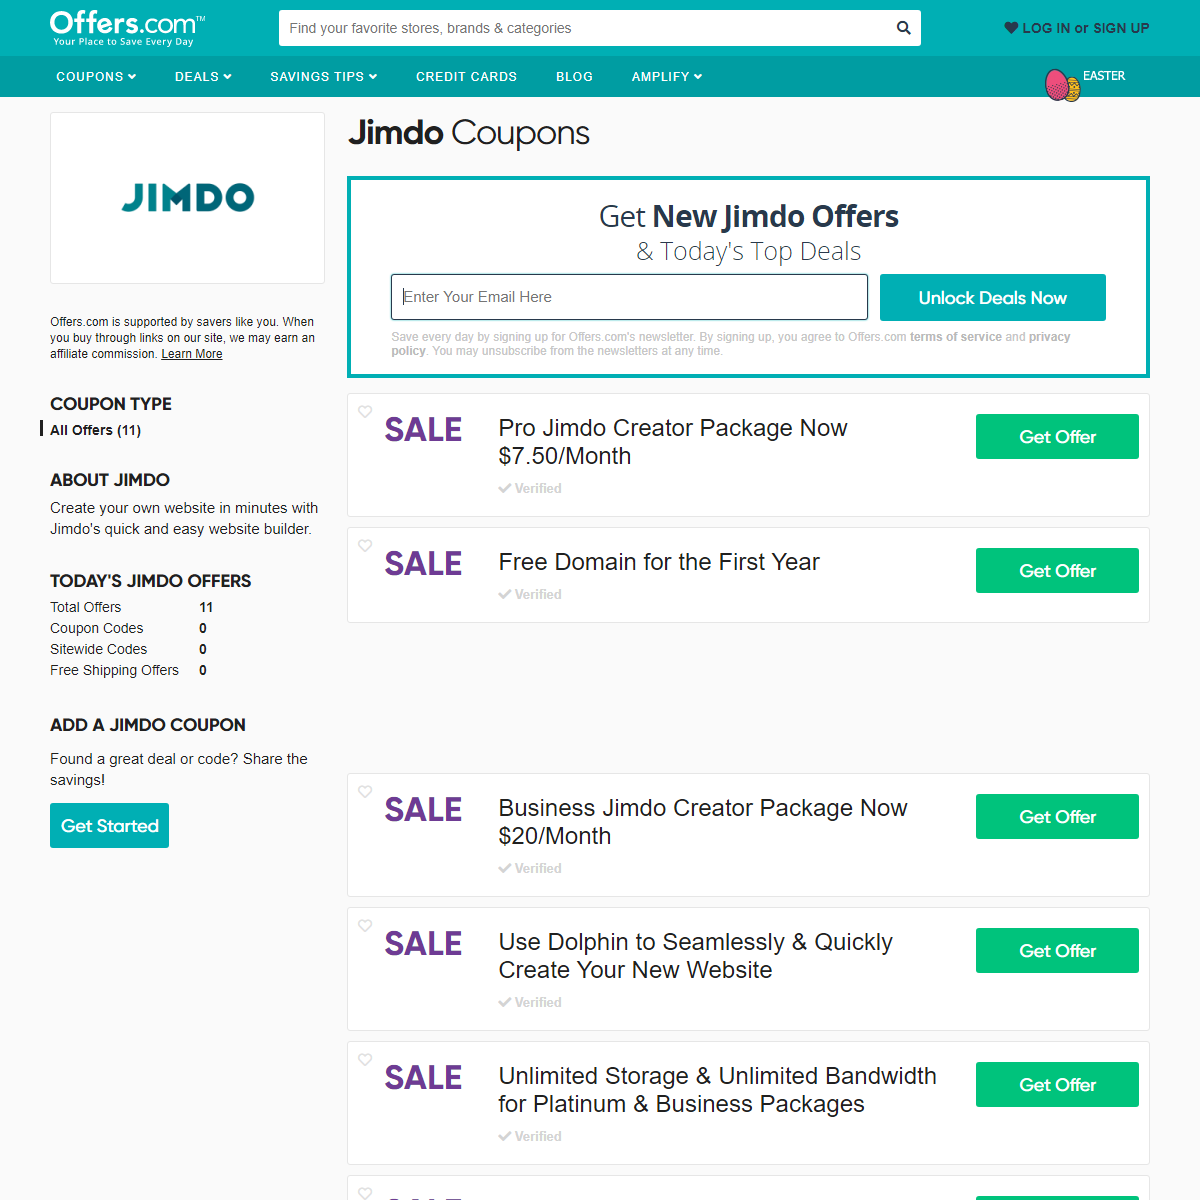 A complete backup of https://www.offers.com/jimdo/